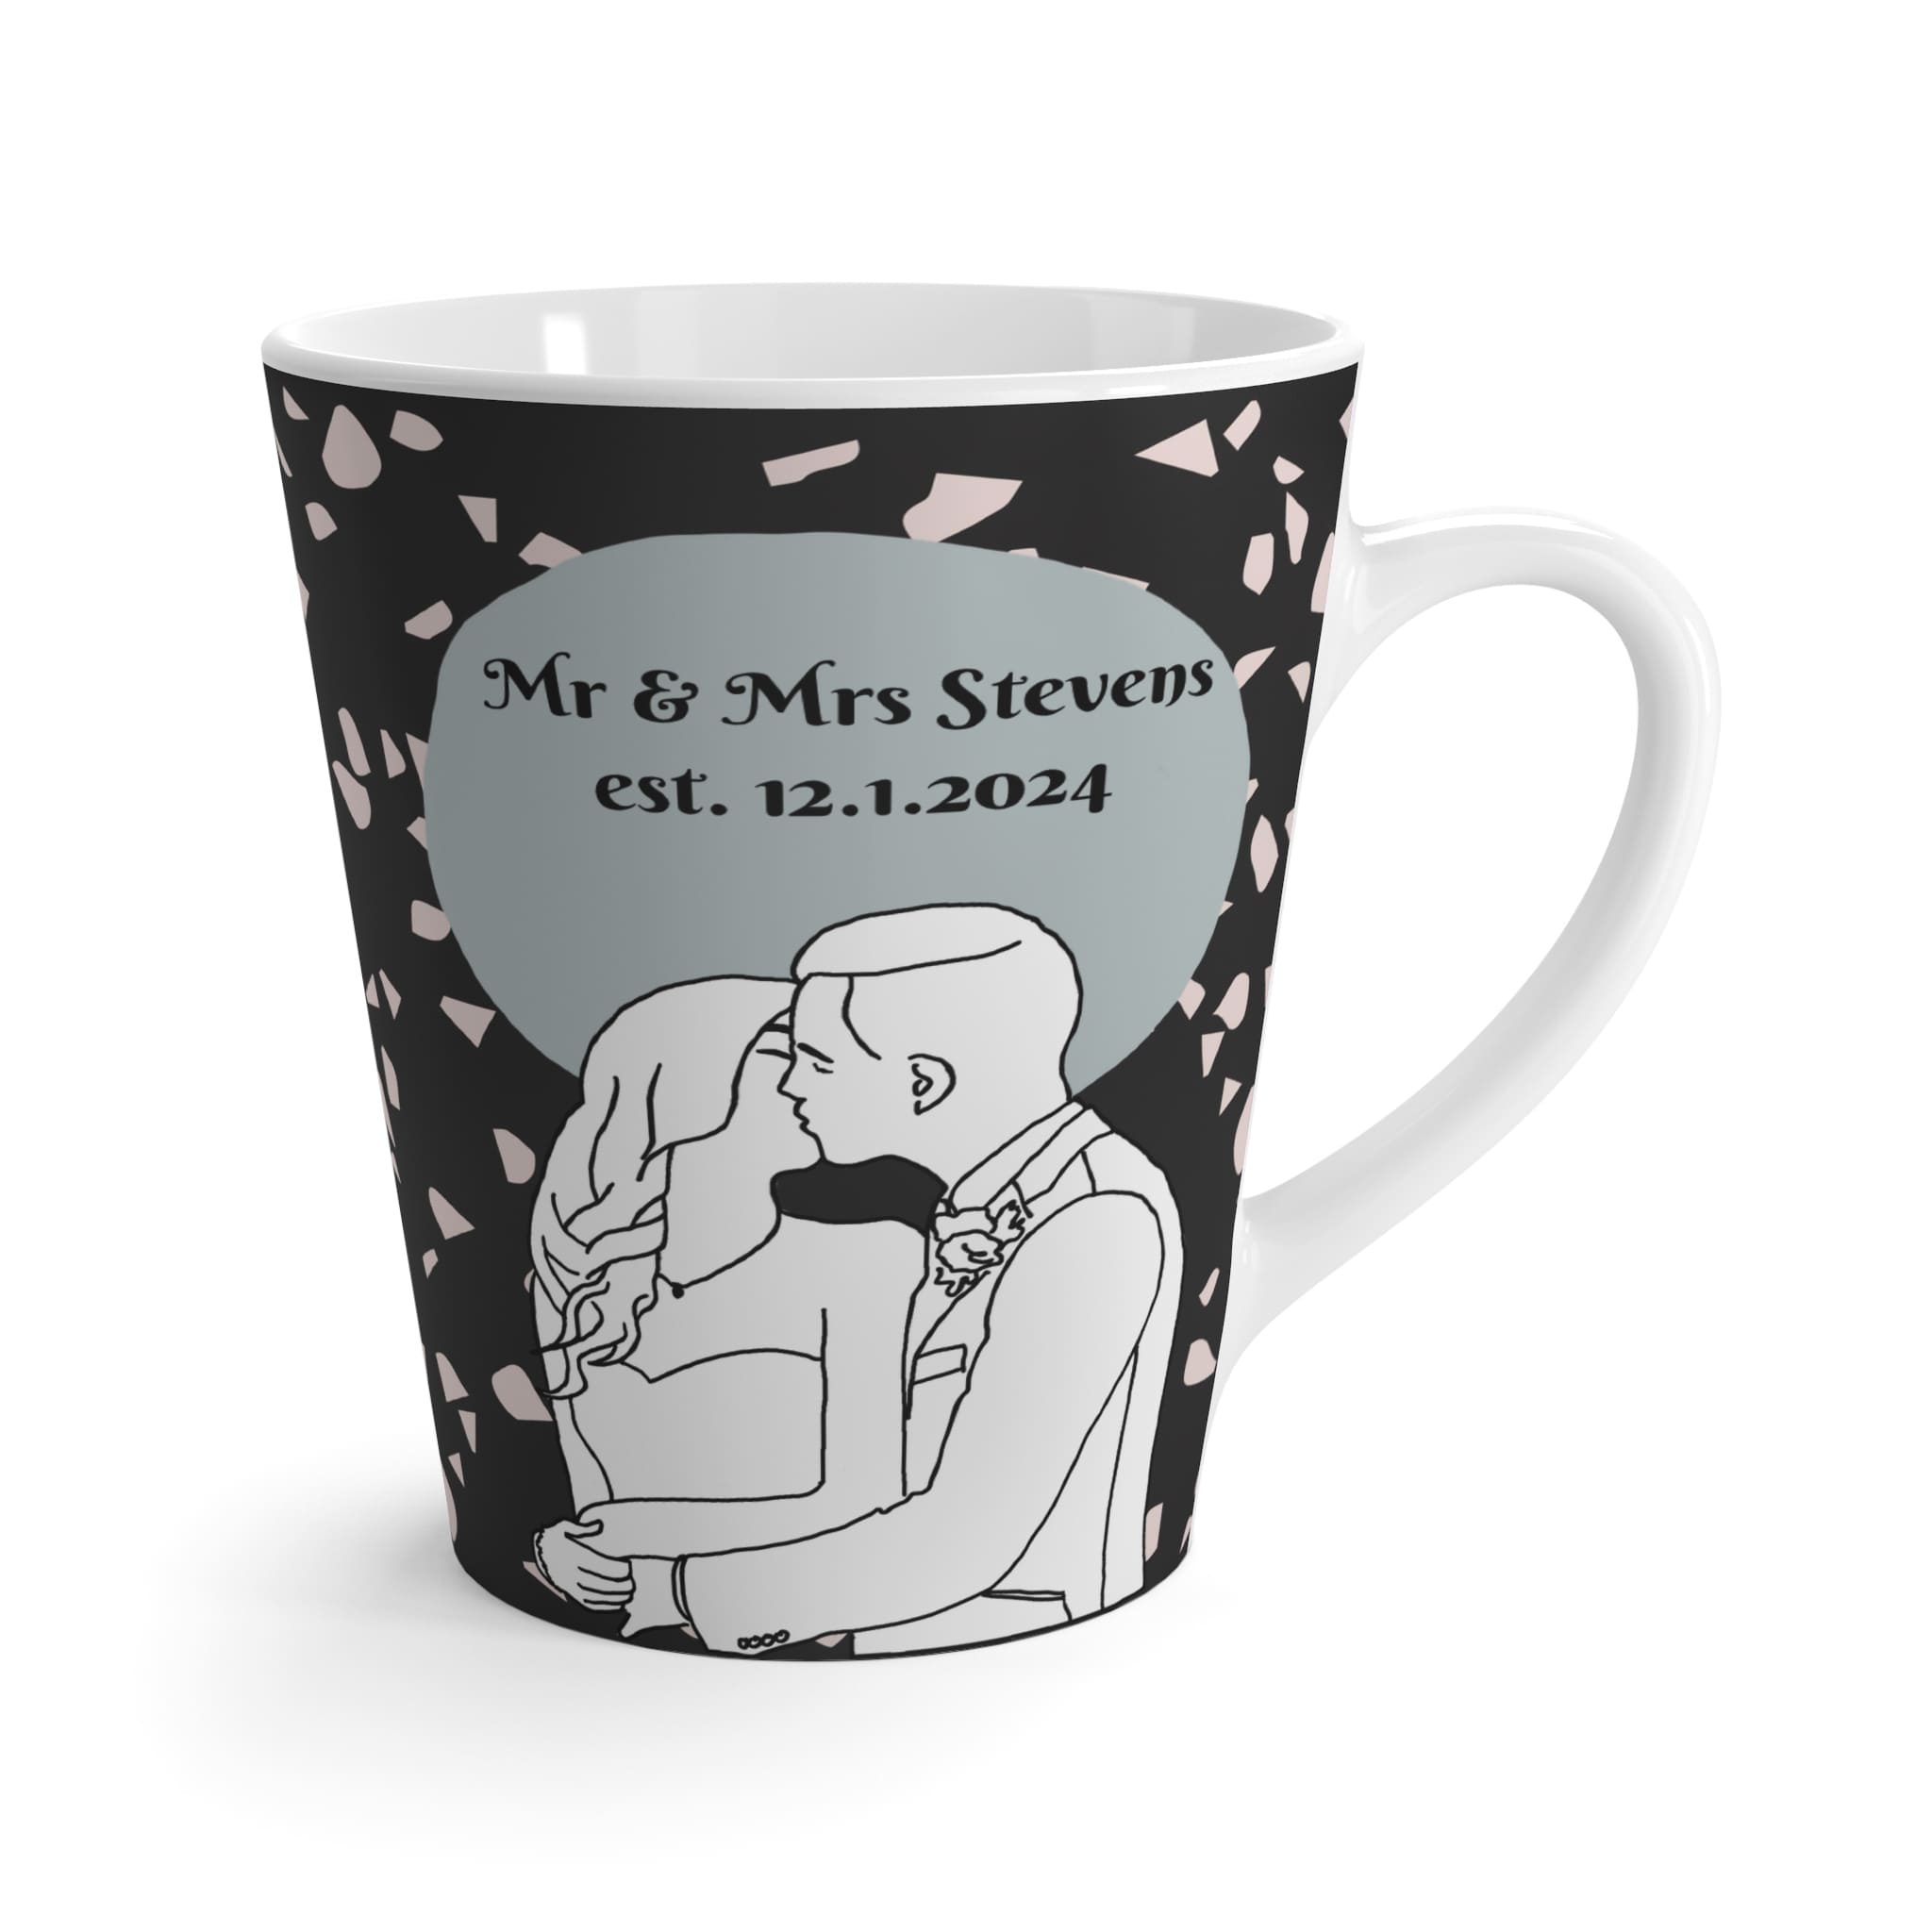 custom line portrait mug with wedding couple their names and date as a keep sake or anniversary gift for their new home